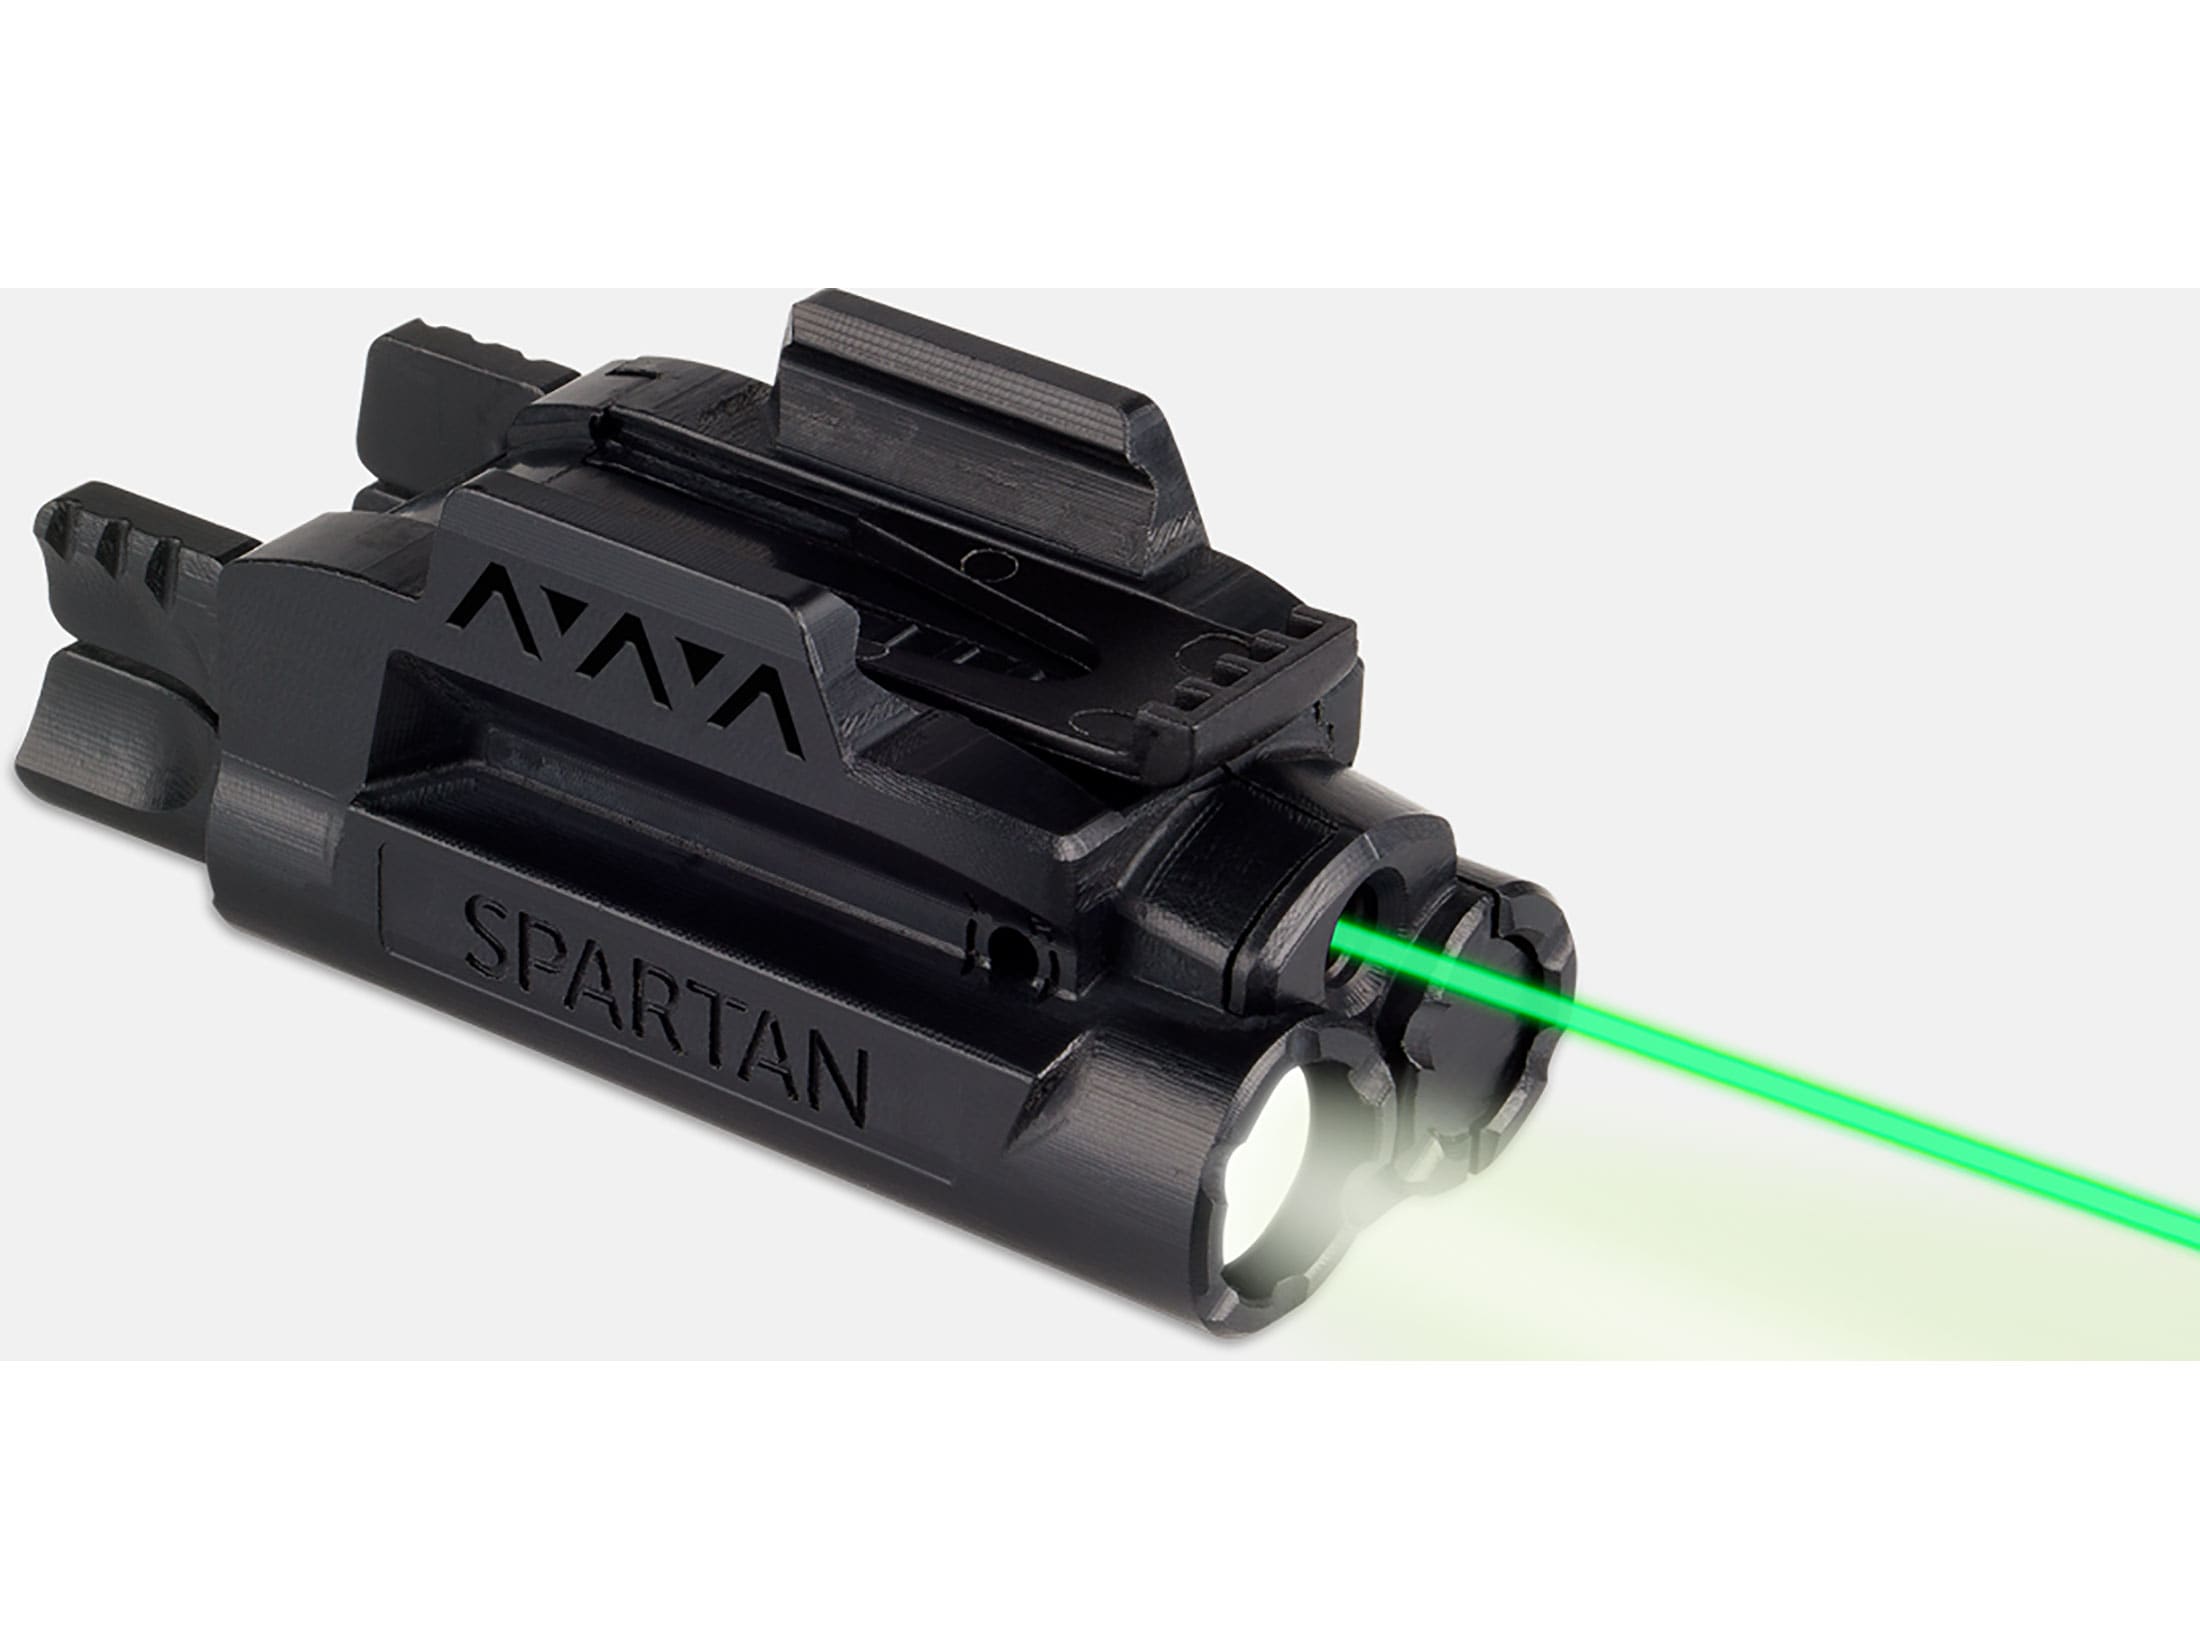 tactical light with laser